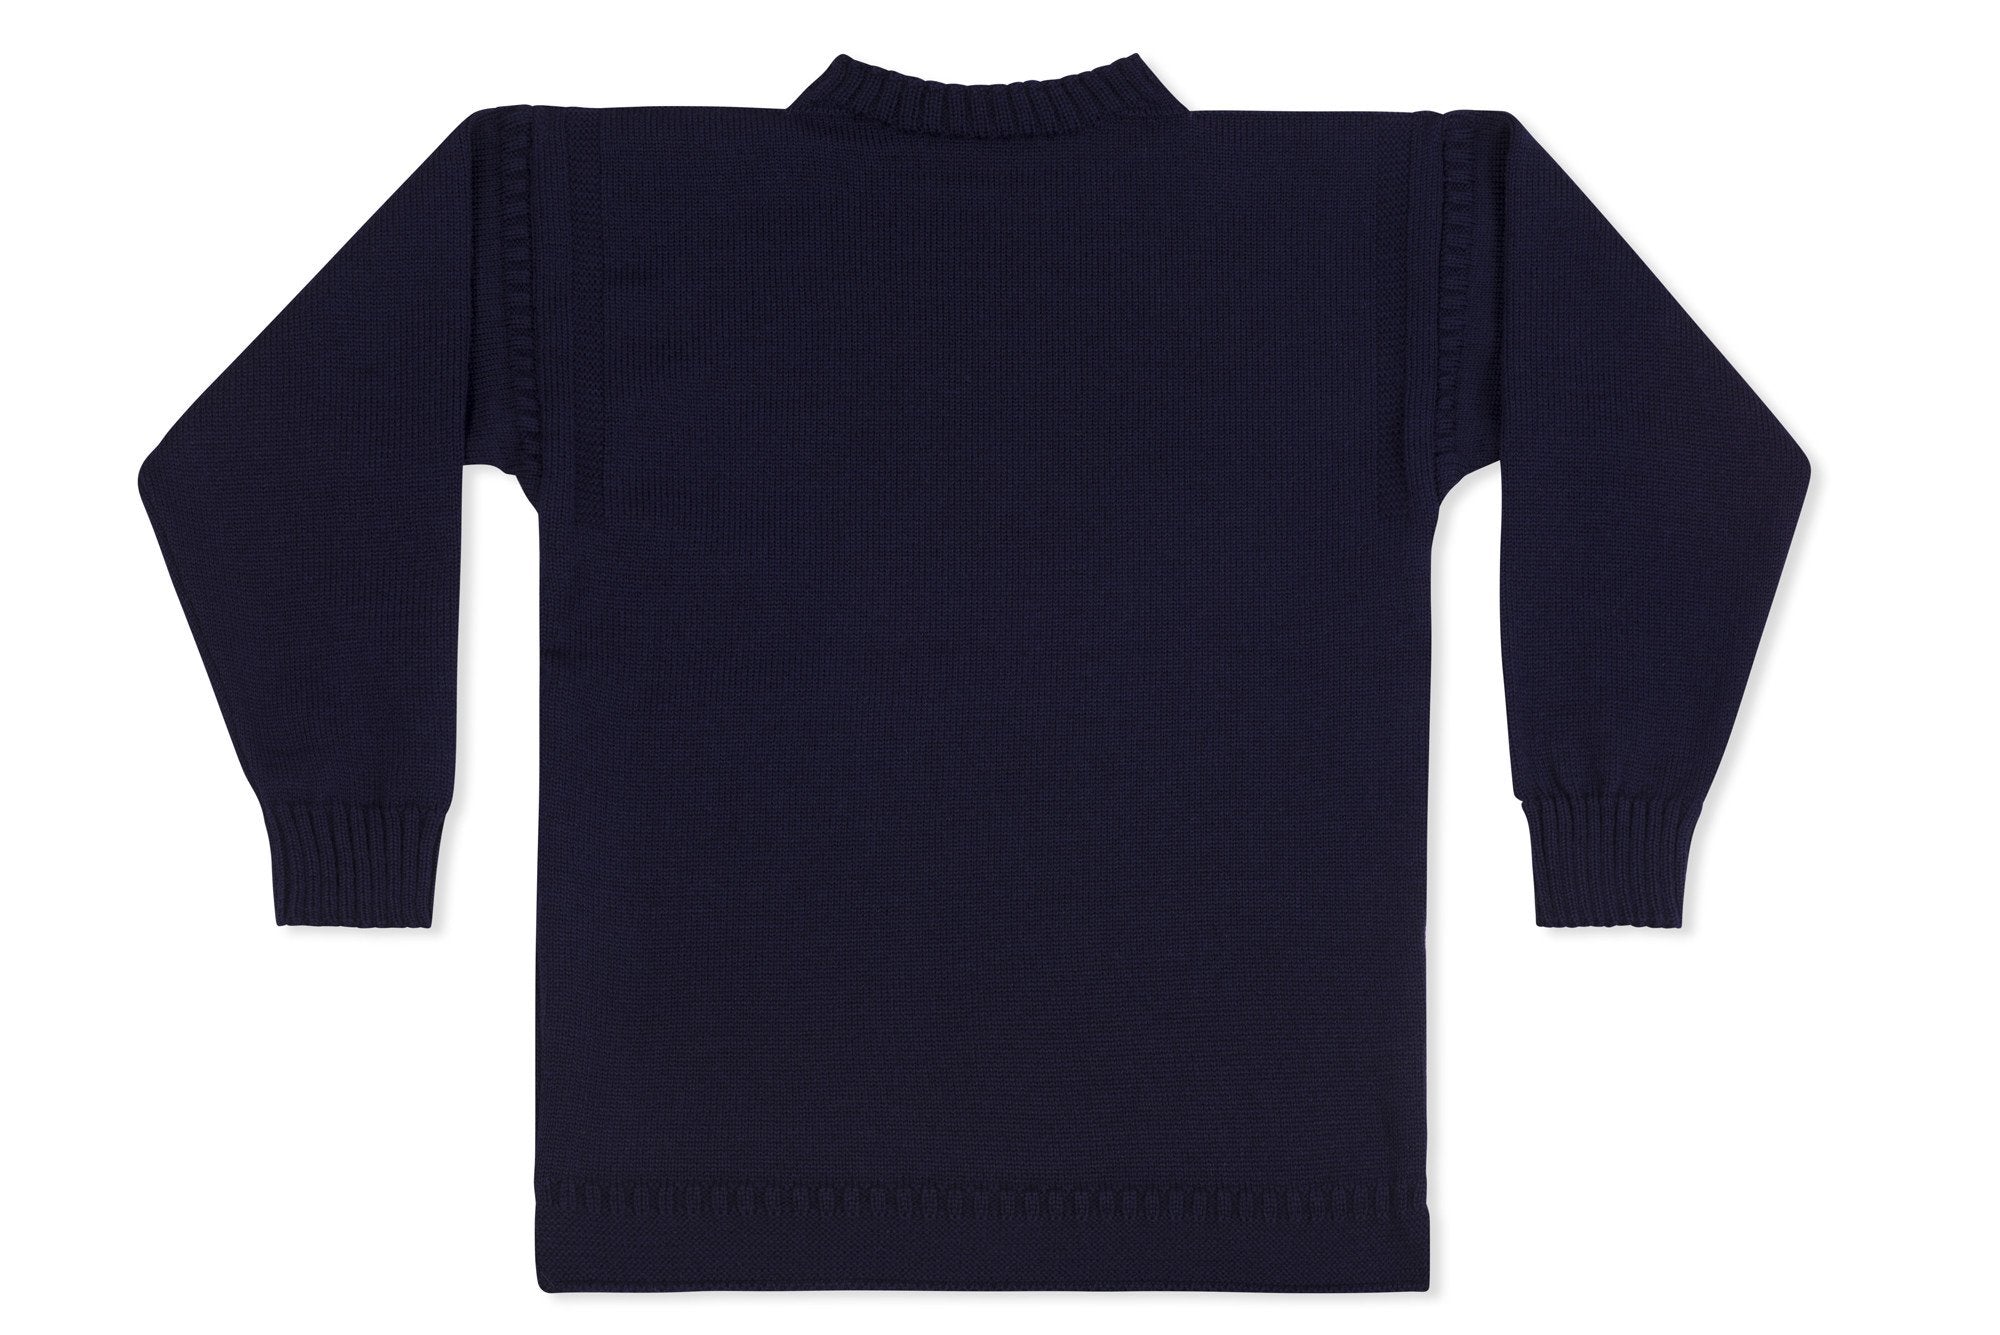 https://www.guernseywoollens.com/cdn/shop/products/traditional-guernsey-jumper-in-navy-jumpers-guernsey-knitwear-guernsey-jumper.jpg?v=1599030782